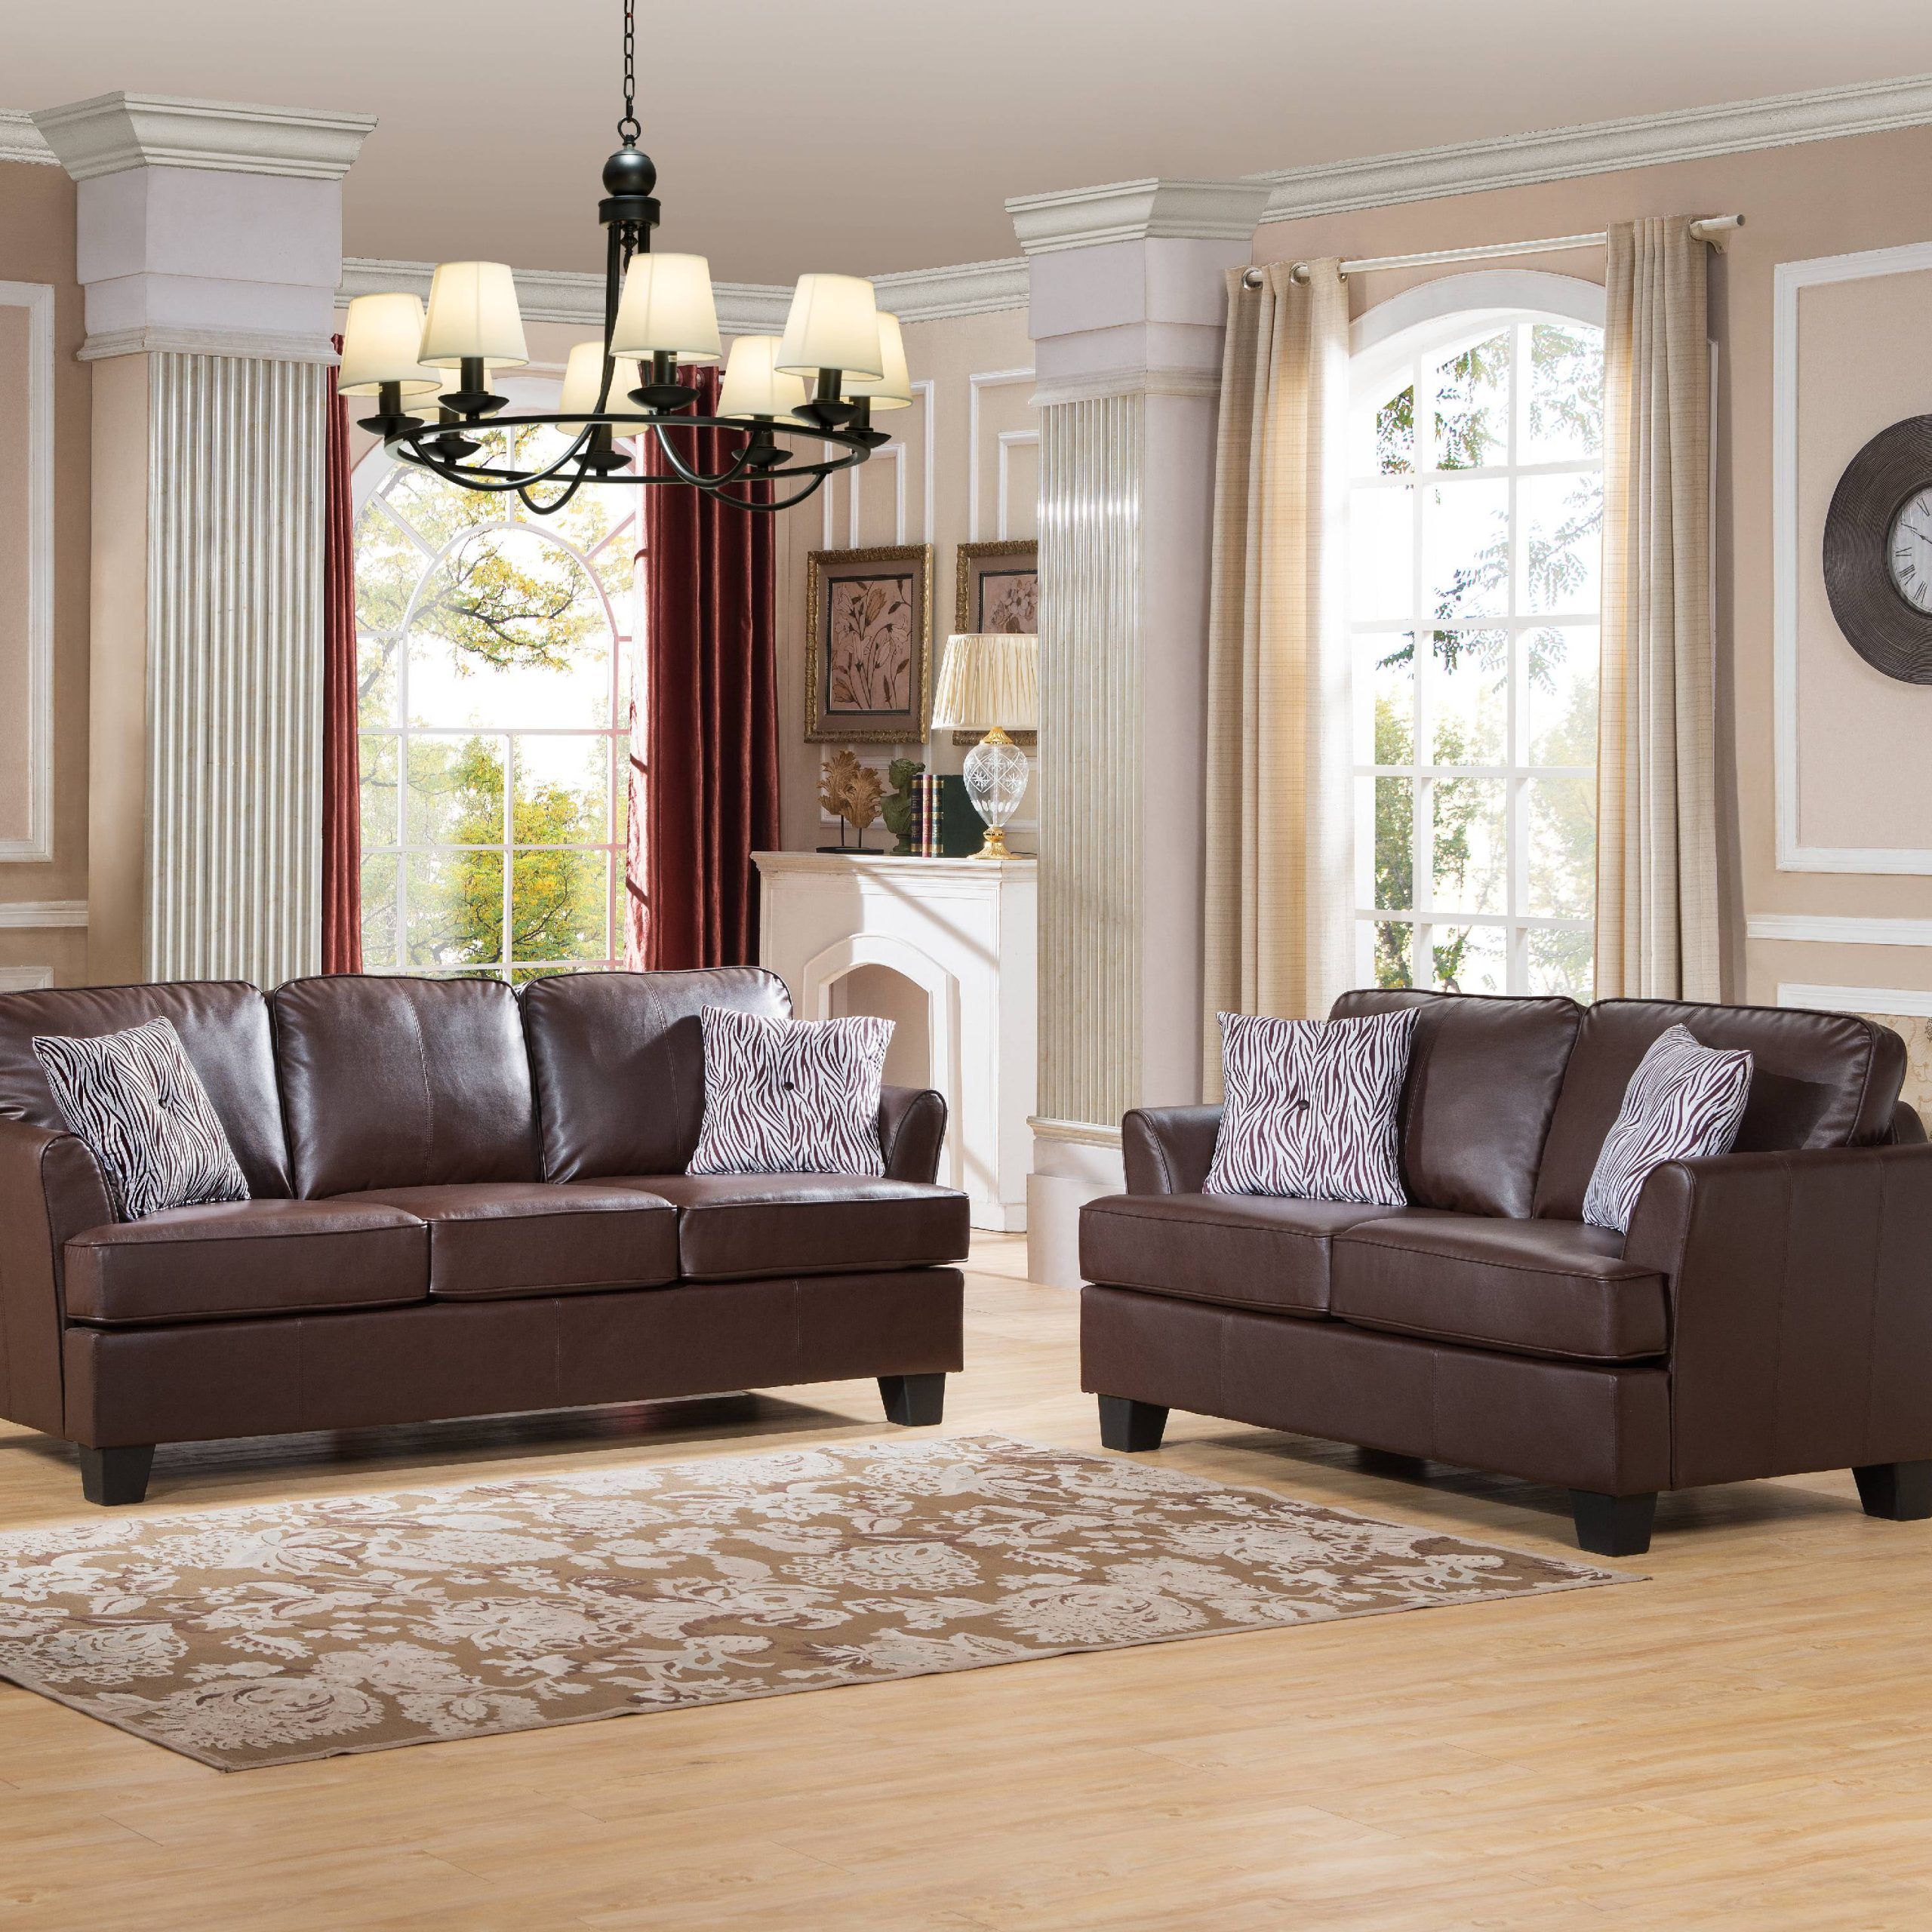 20+ Living Room Sofas Intended For Sofas For Living Rooms (View 9 of 20)